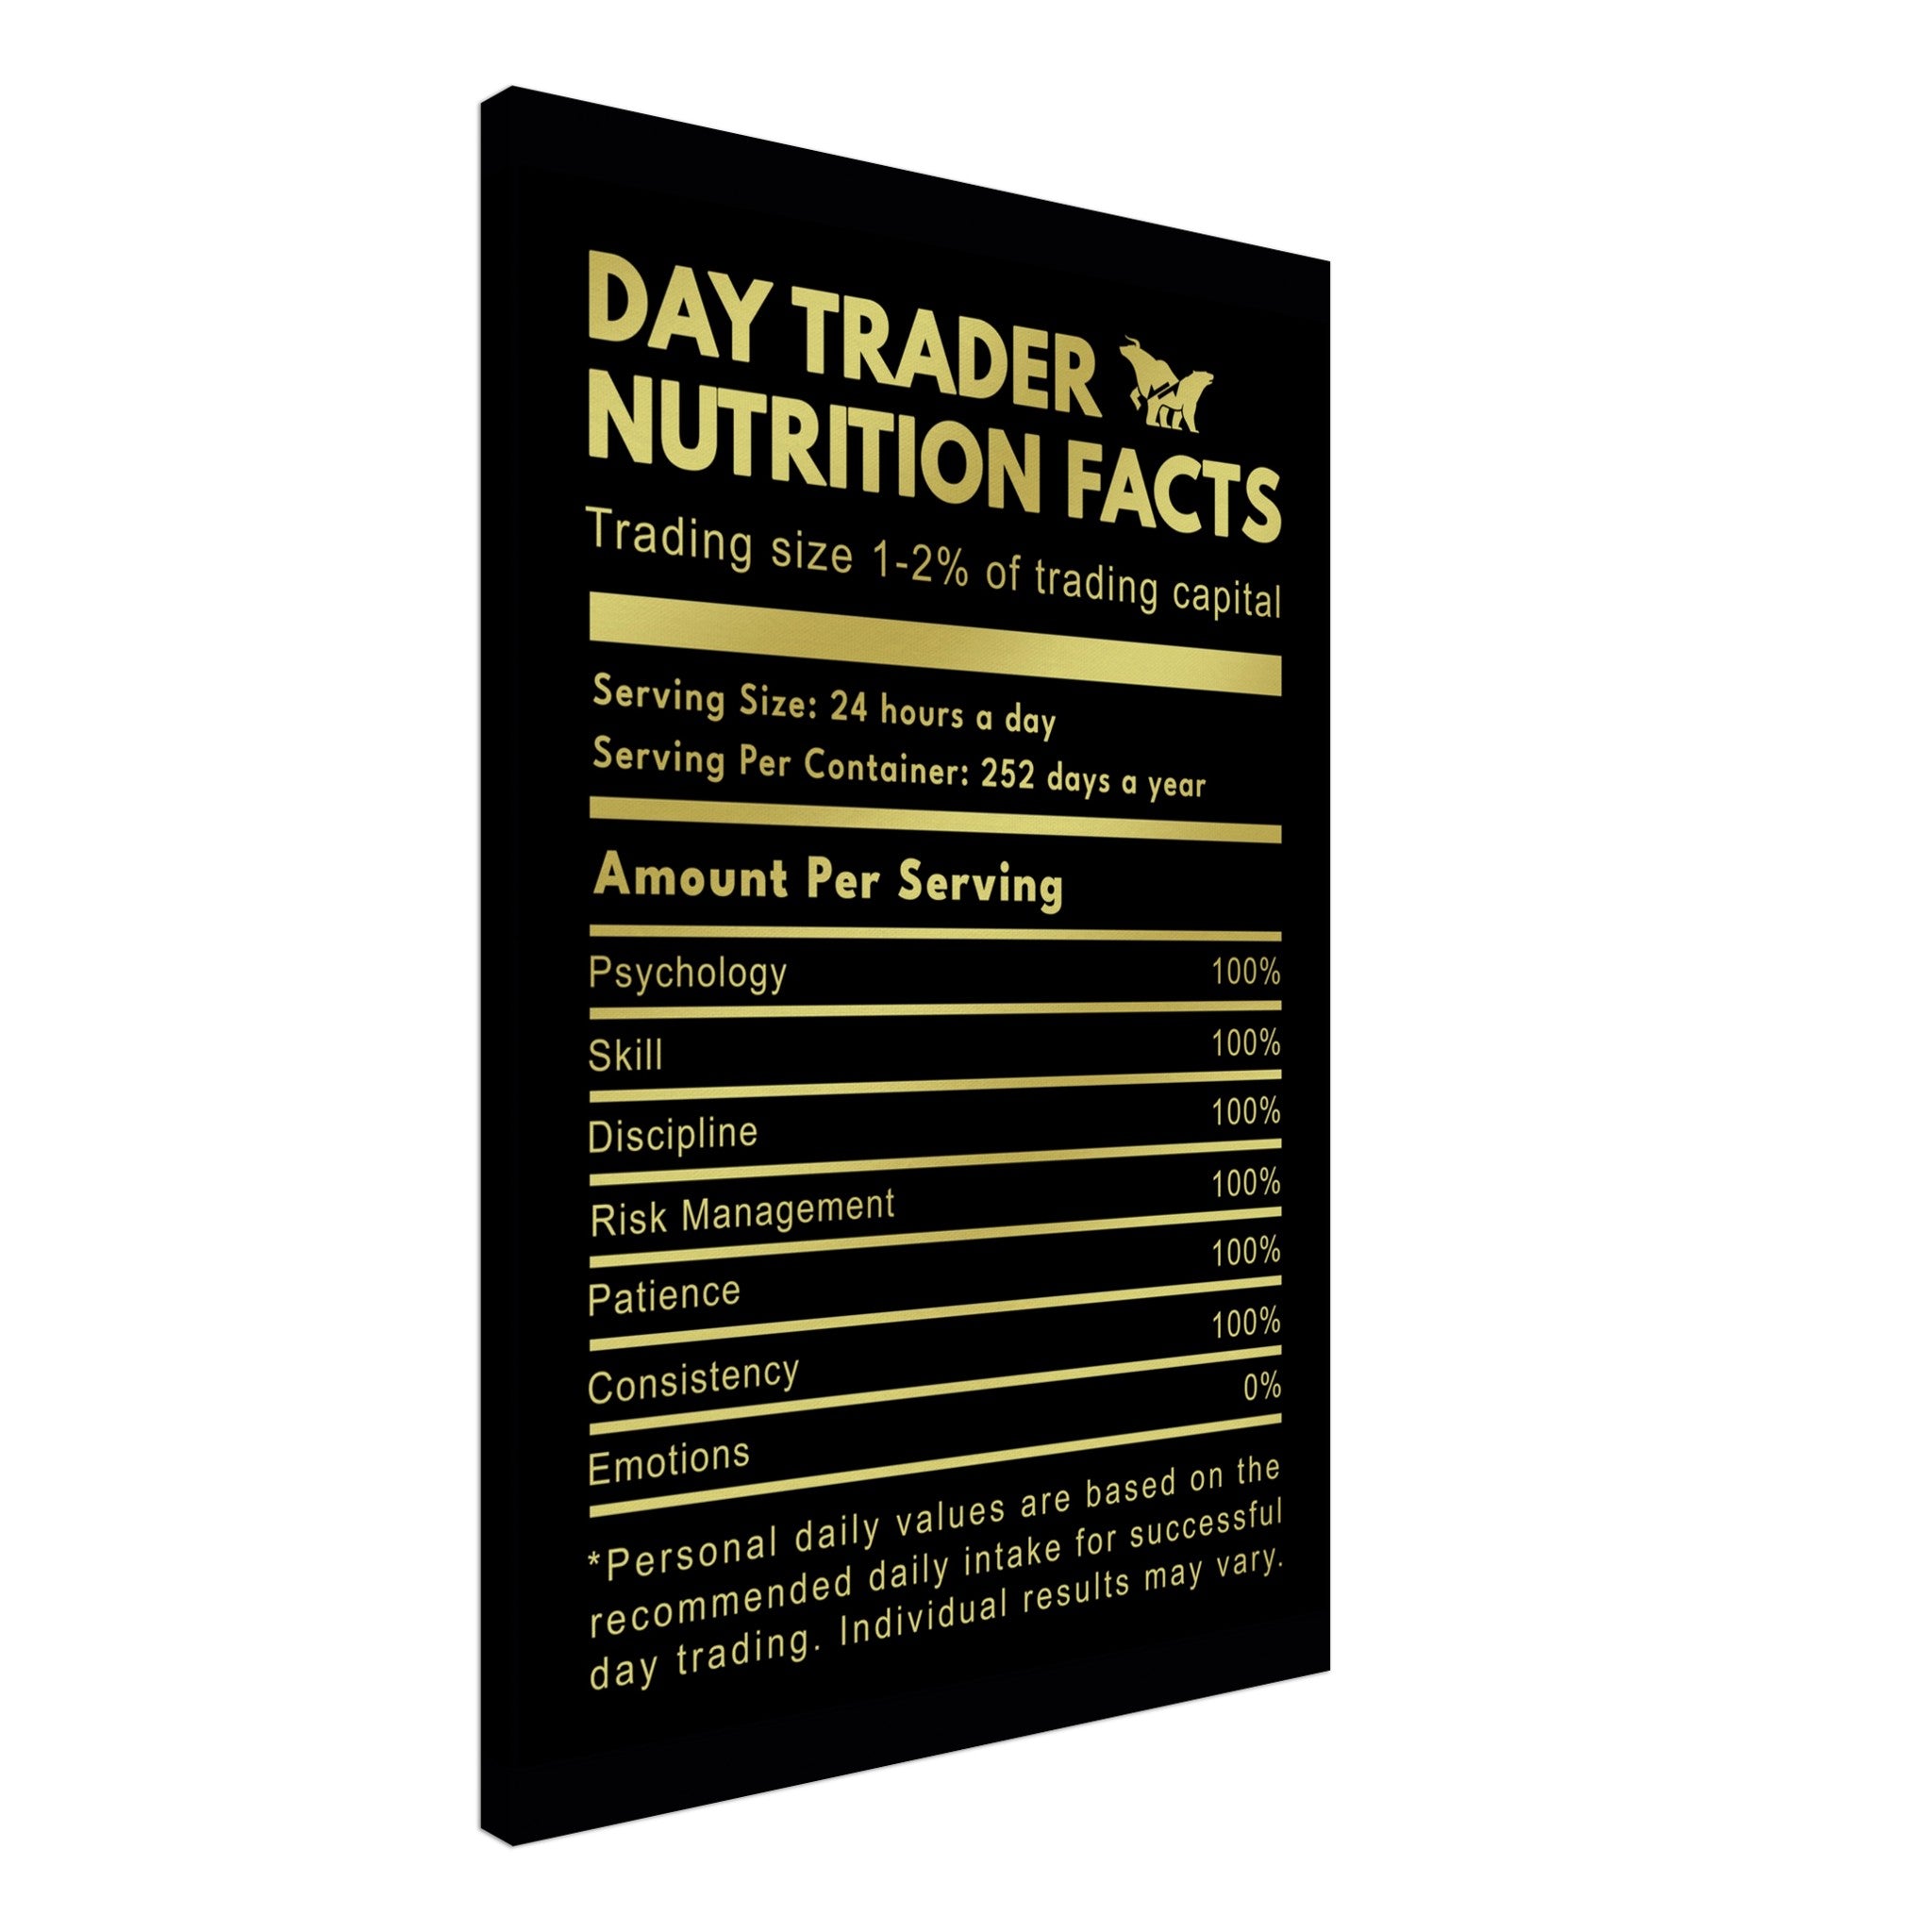 Day Trader Nutrition Facts